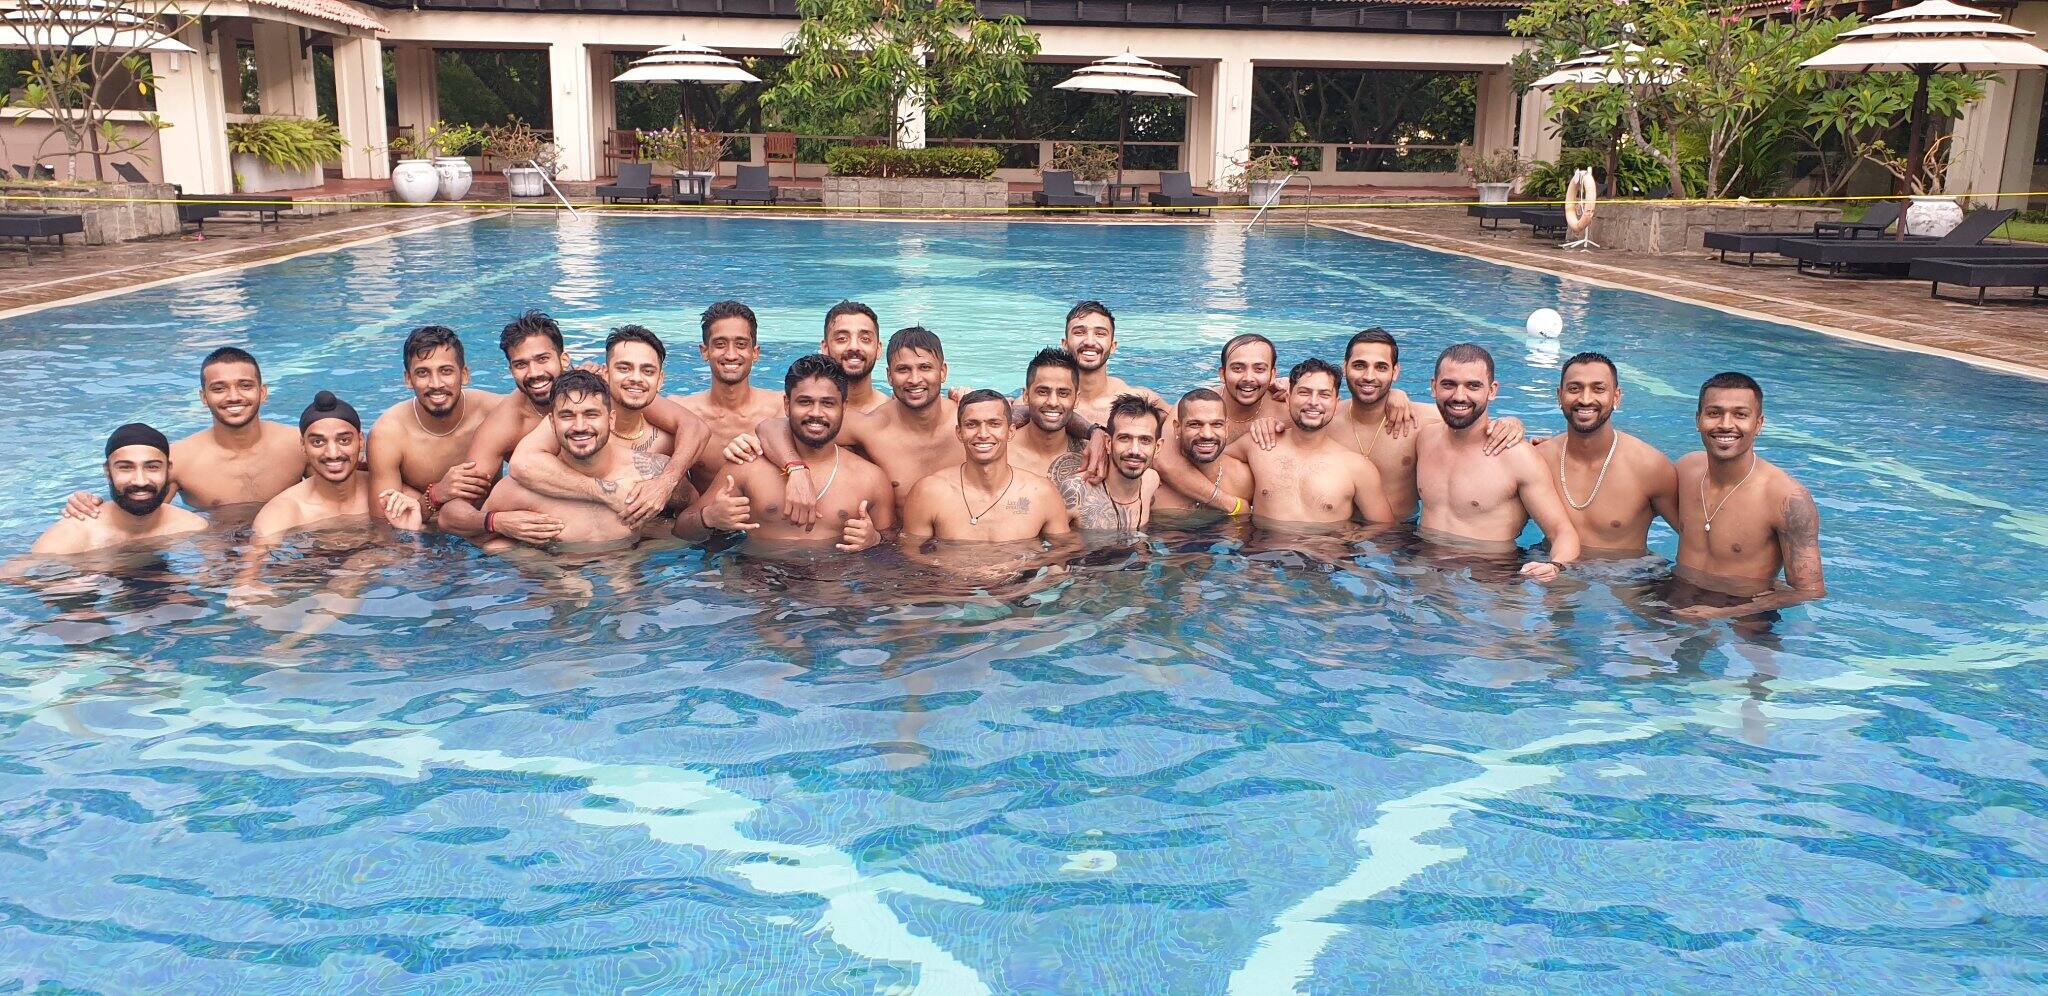 Team India players